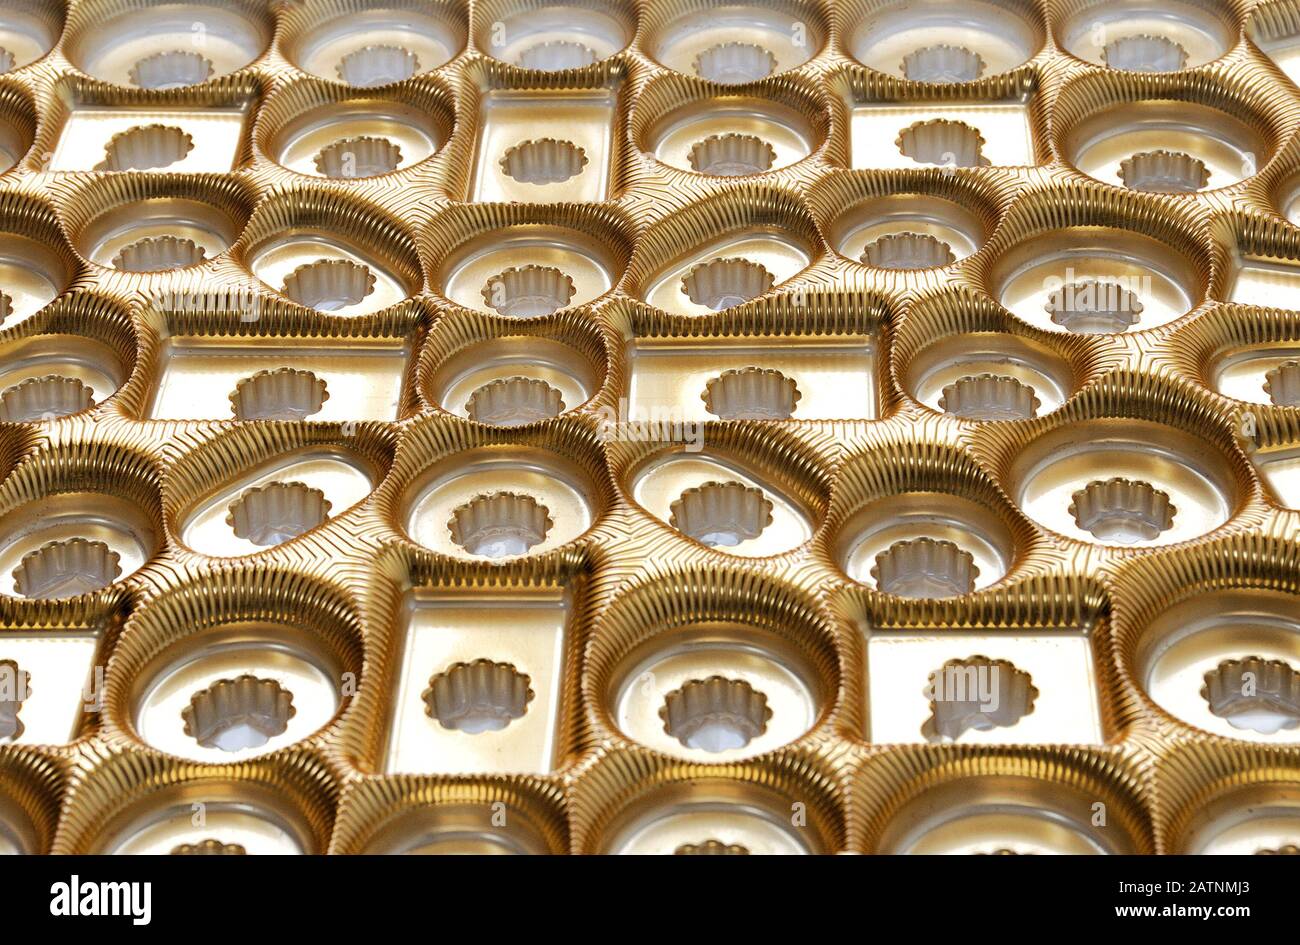 Golden plastic compartments inside chocolate gift box. Stock Photo